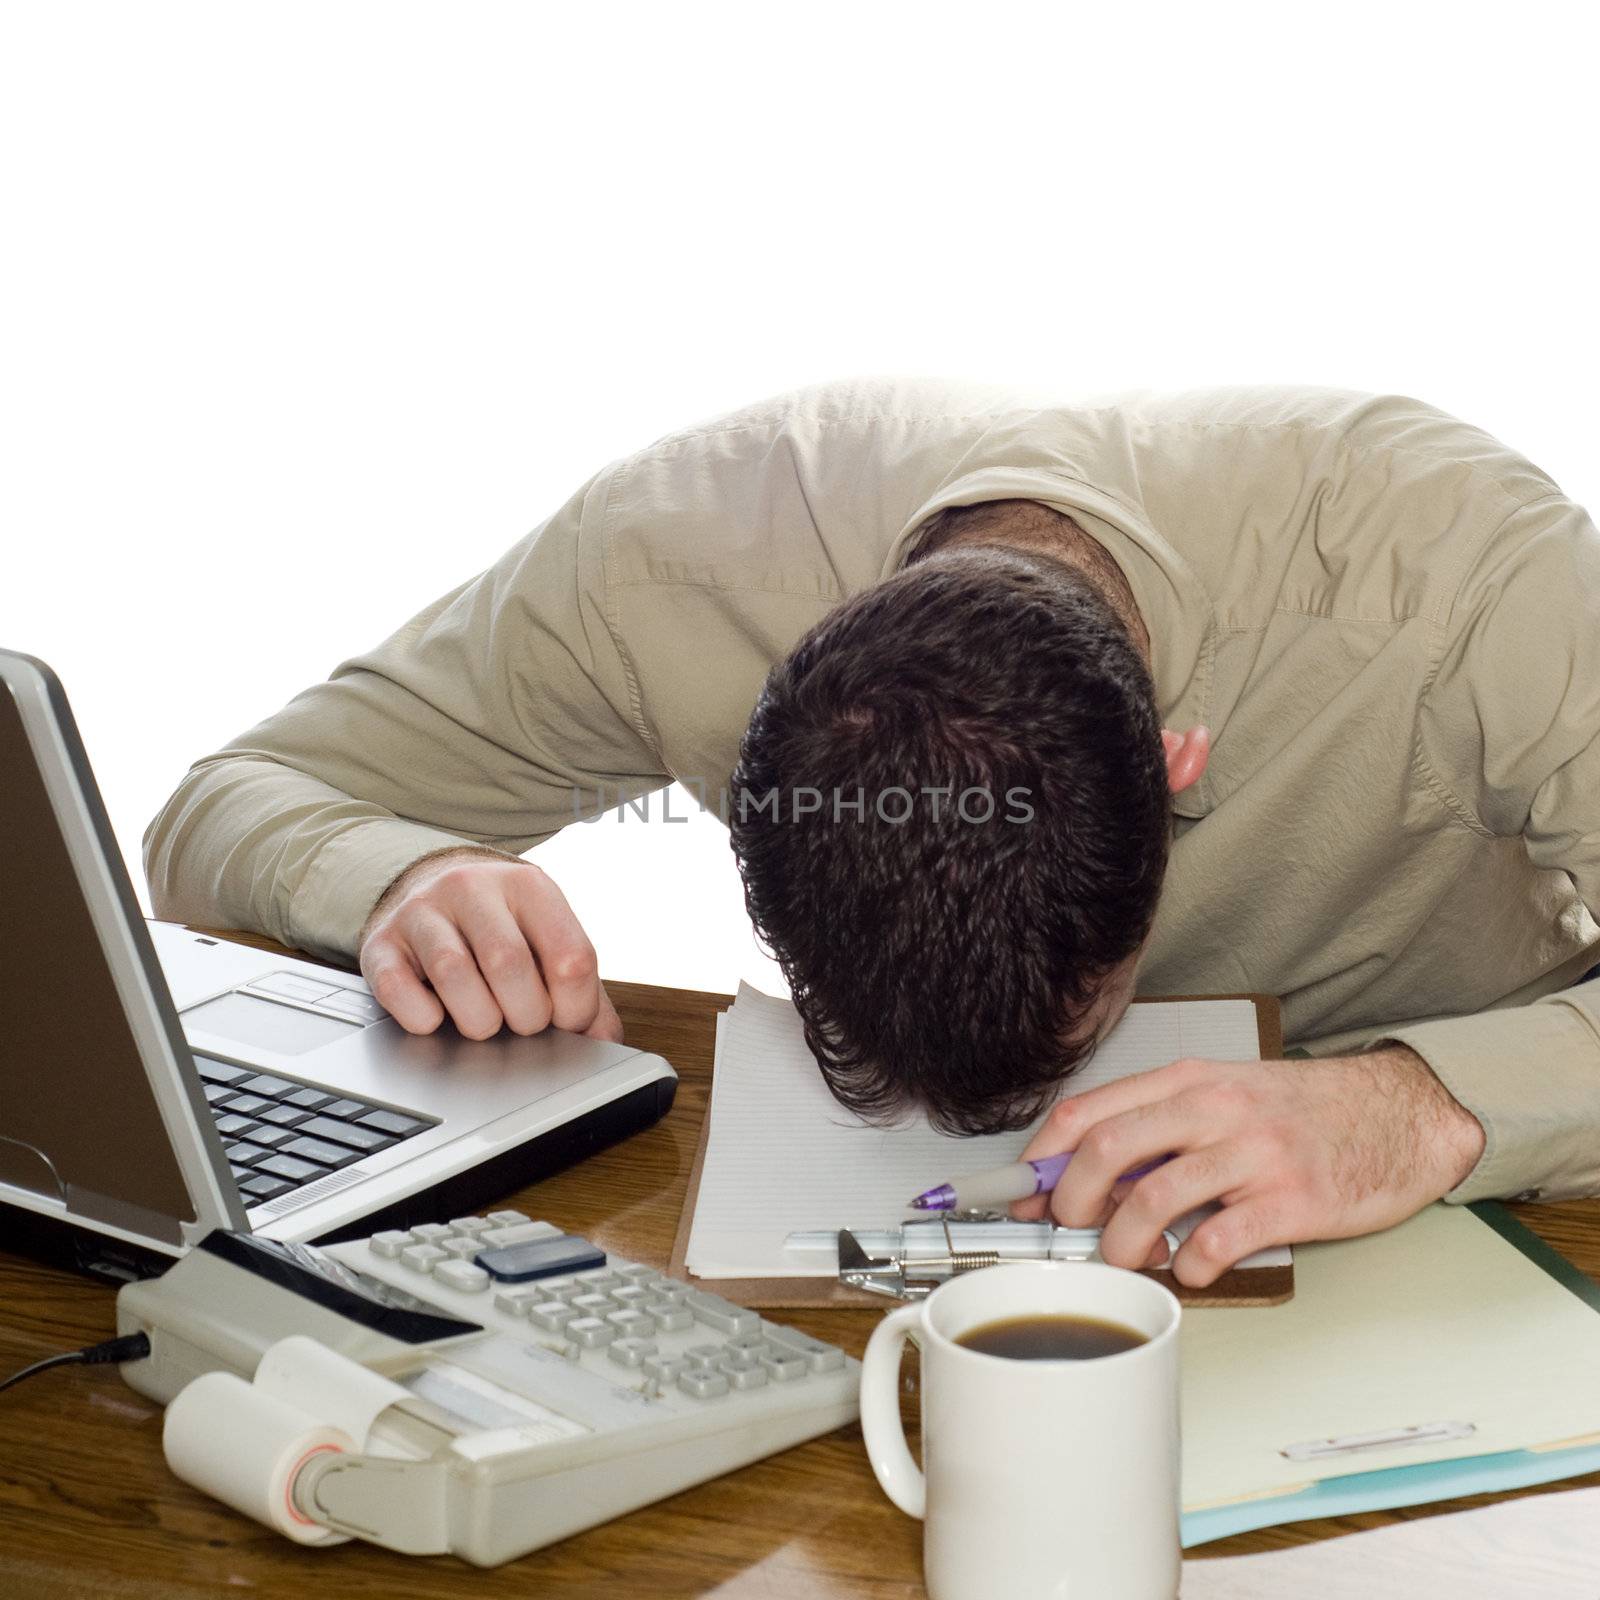 A depressed businessman lying with his head on his desk, isolated against a white background